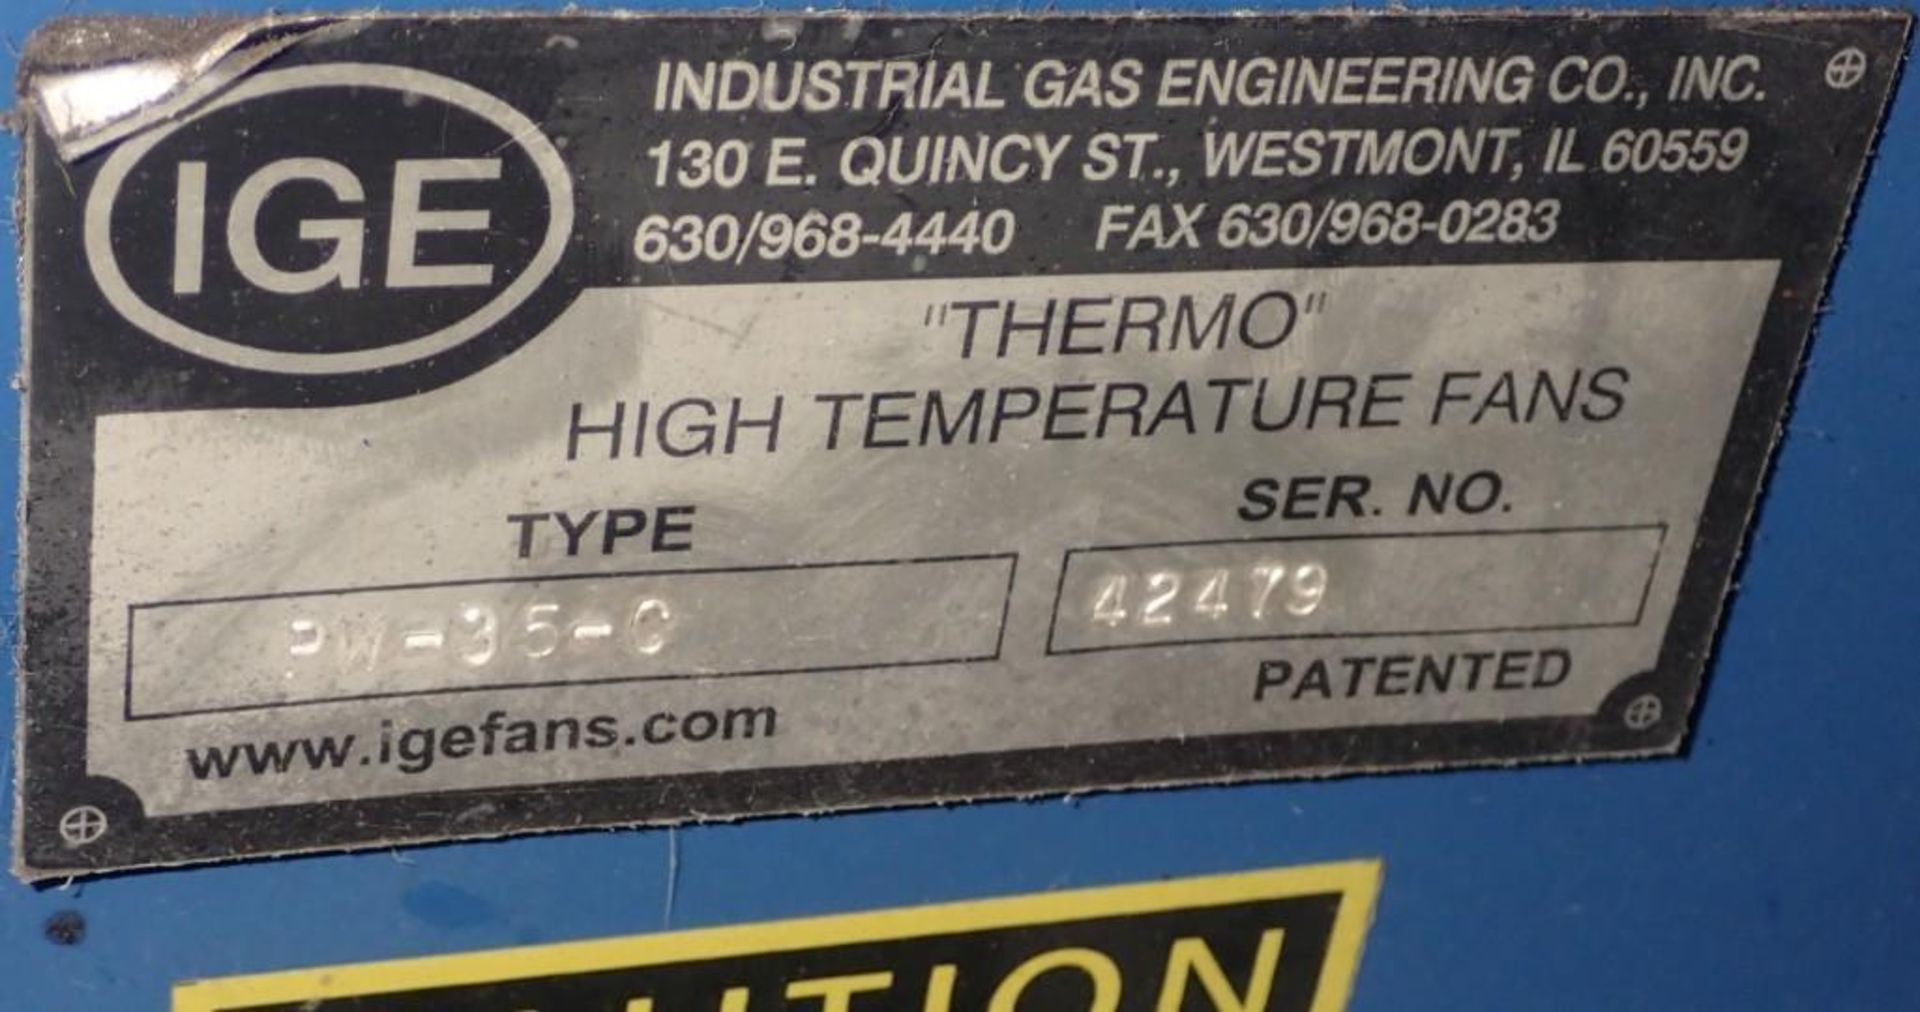 IGE #PW-35-C "Thermo" High Temperature Fan - Image 5 of 5